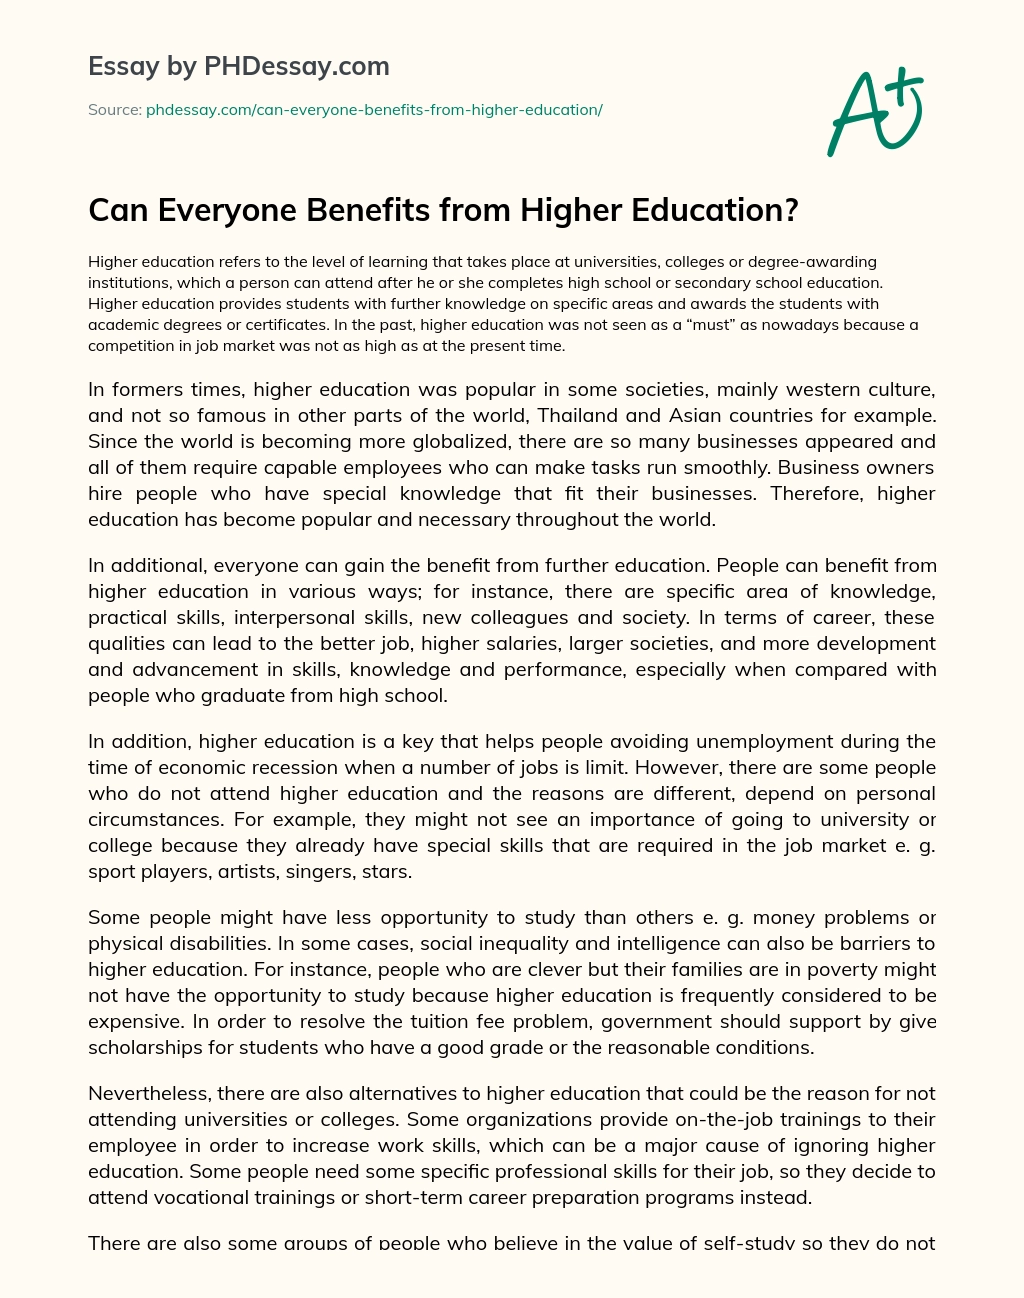 Can Everyone Benefits from Higher Education? essay